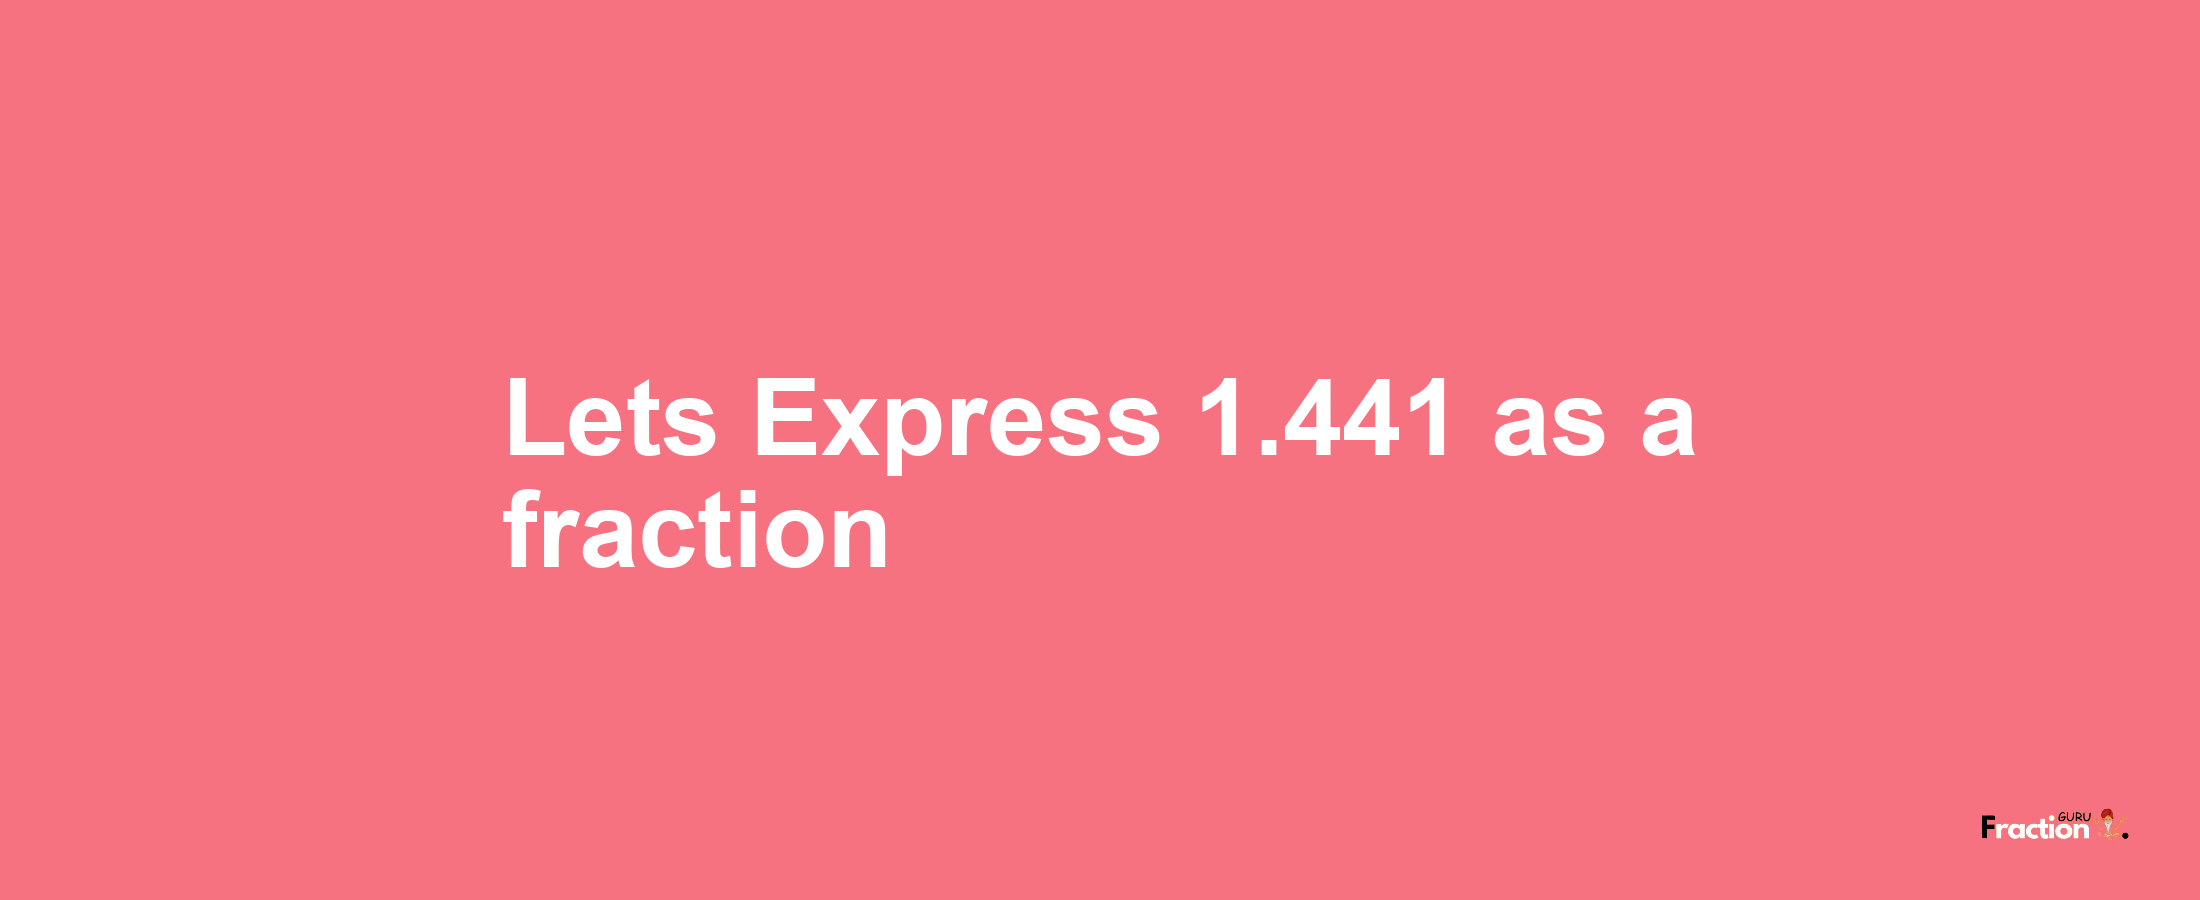 Lets Express 1.441 as afraction